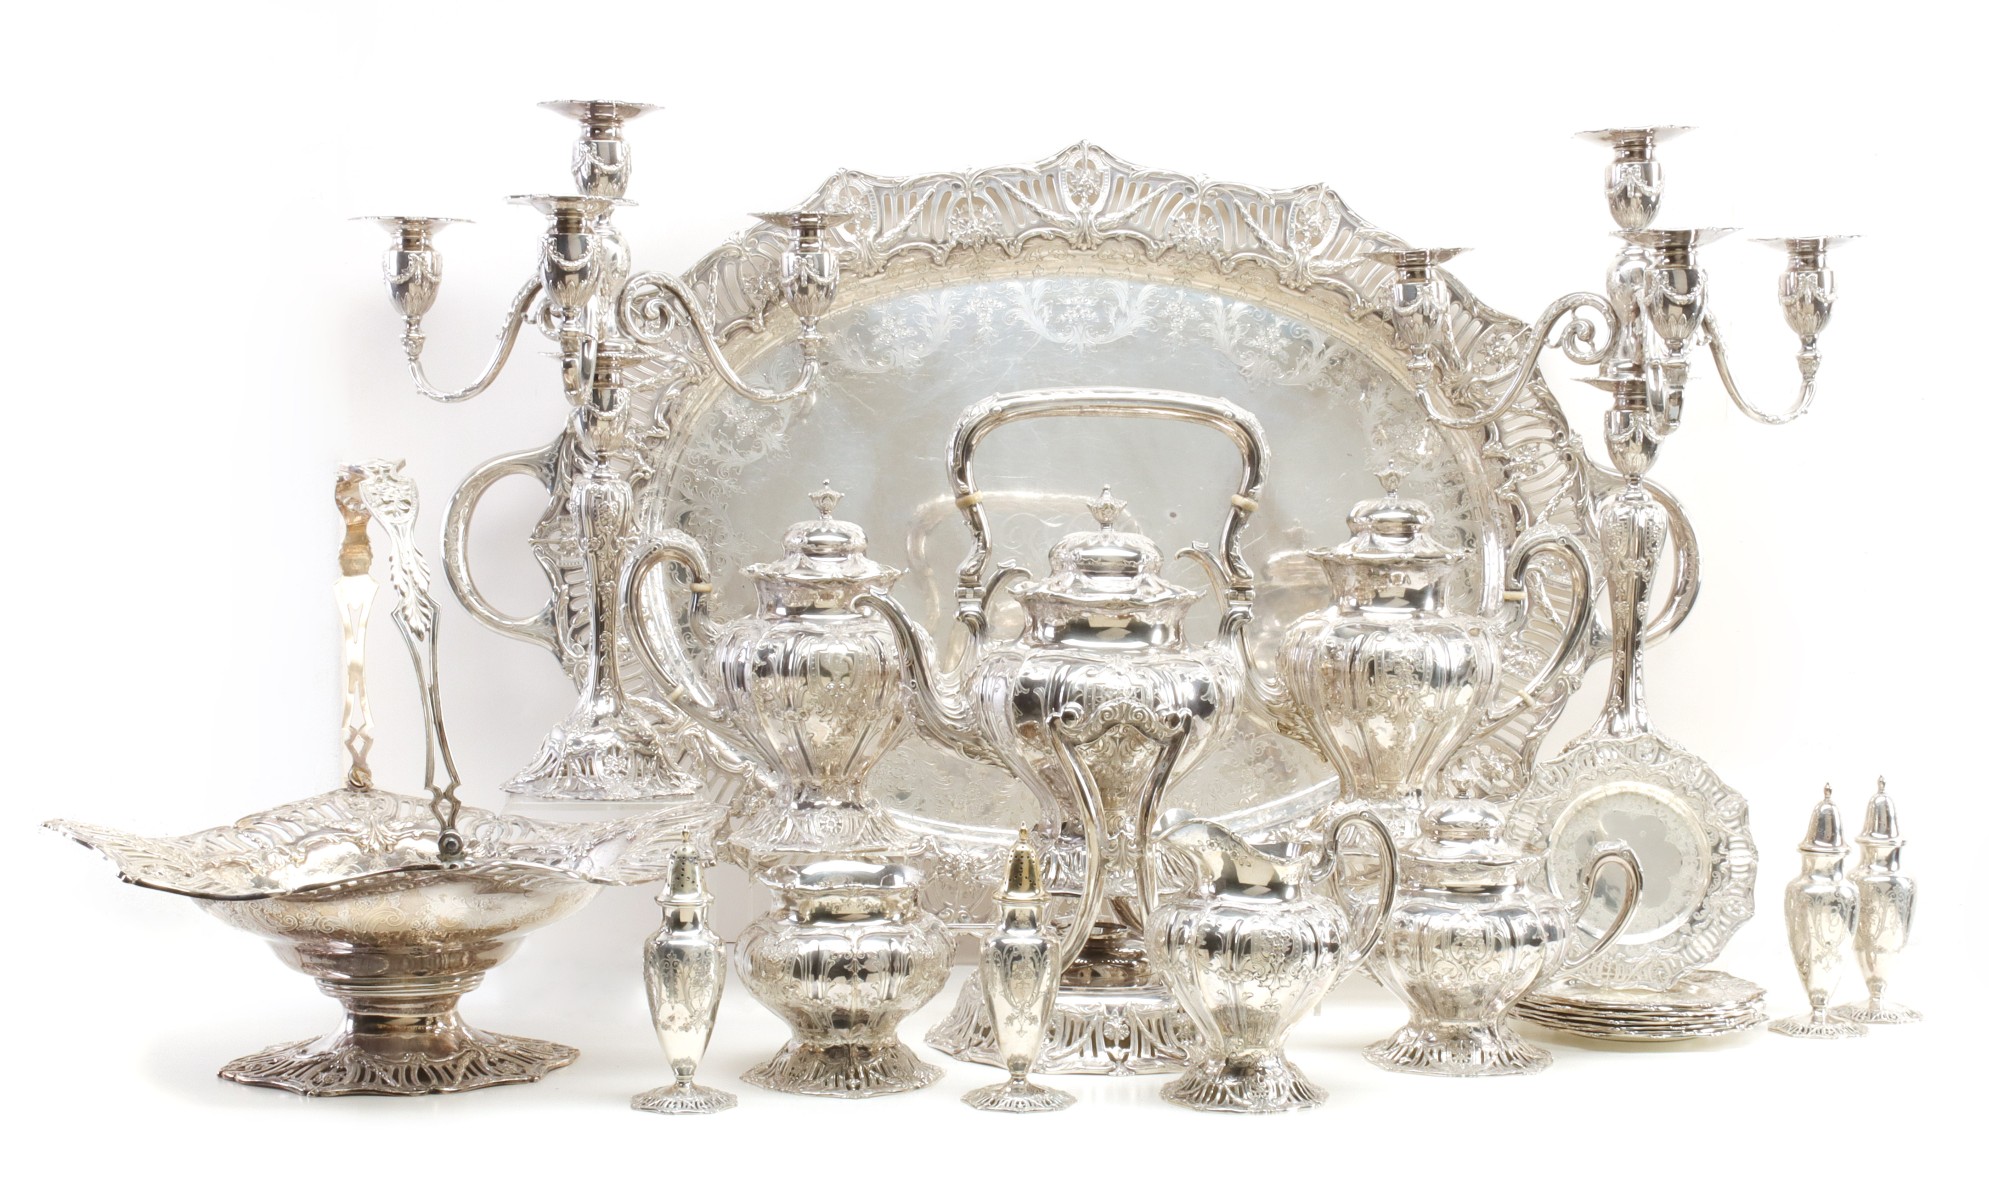 AN IMPRESSIVE 23-PIECE STERLING SILVER TABLE SERVICE